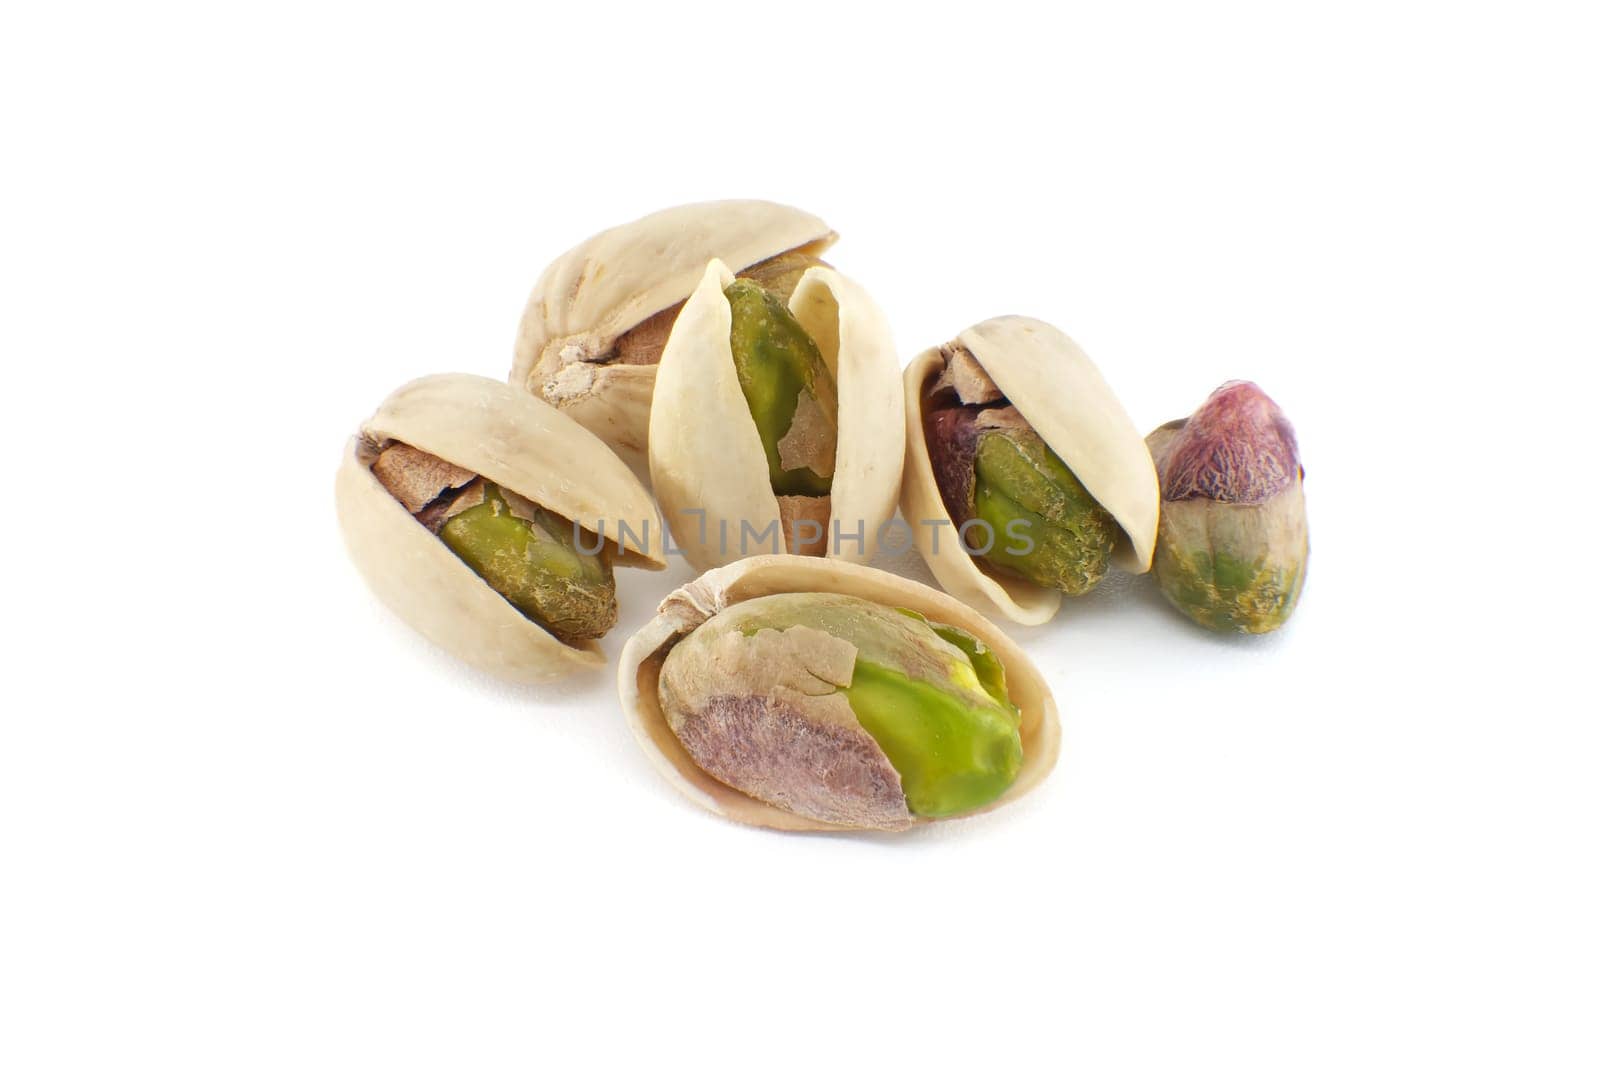 Randomly spread pistachios isolated on white by NetPix